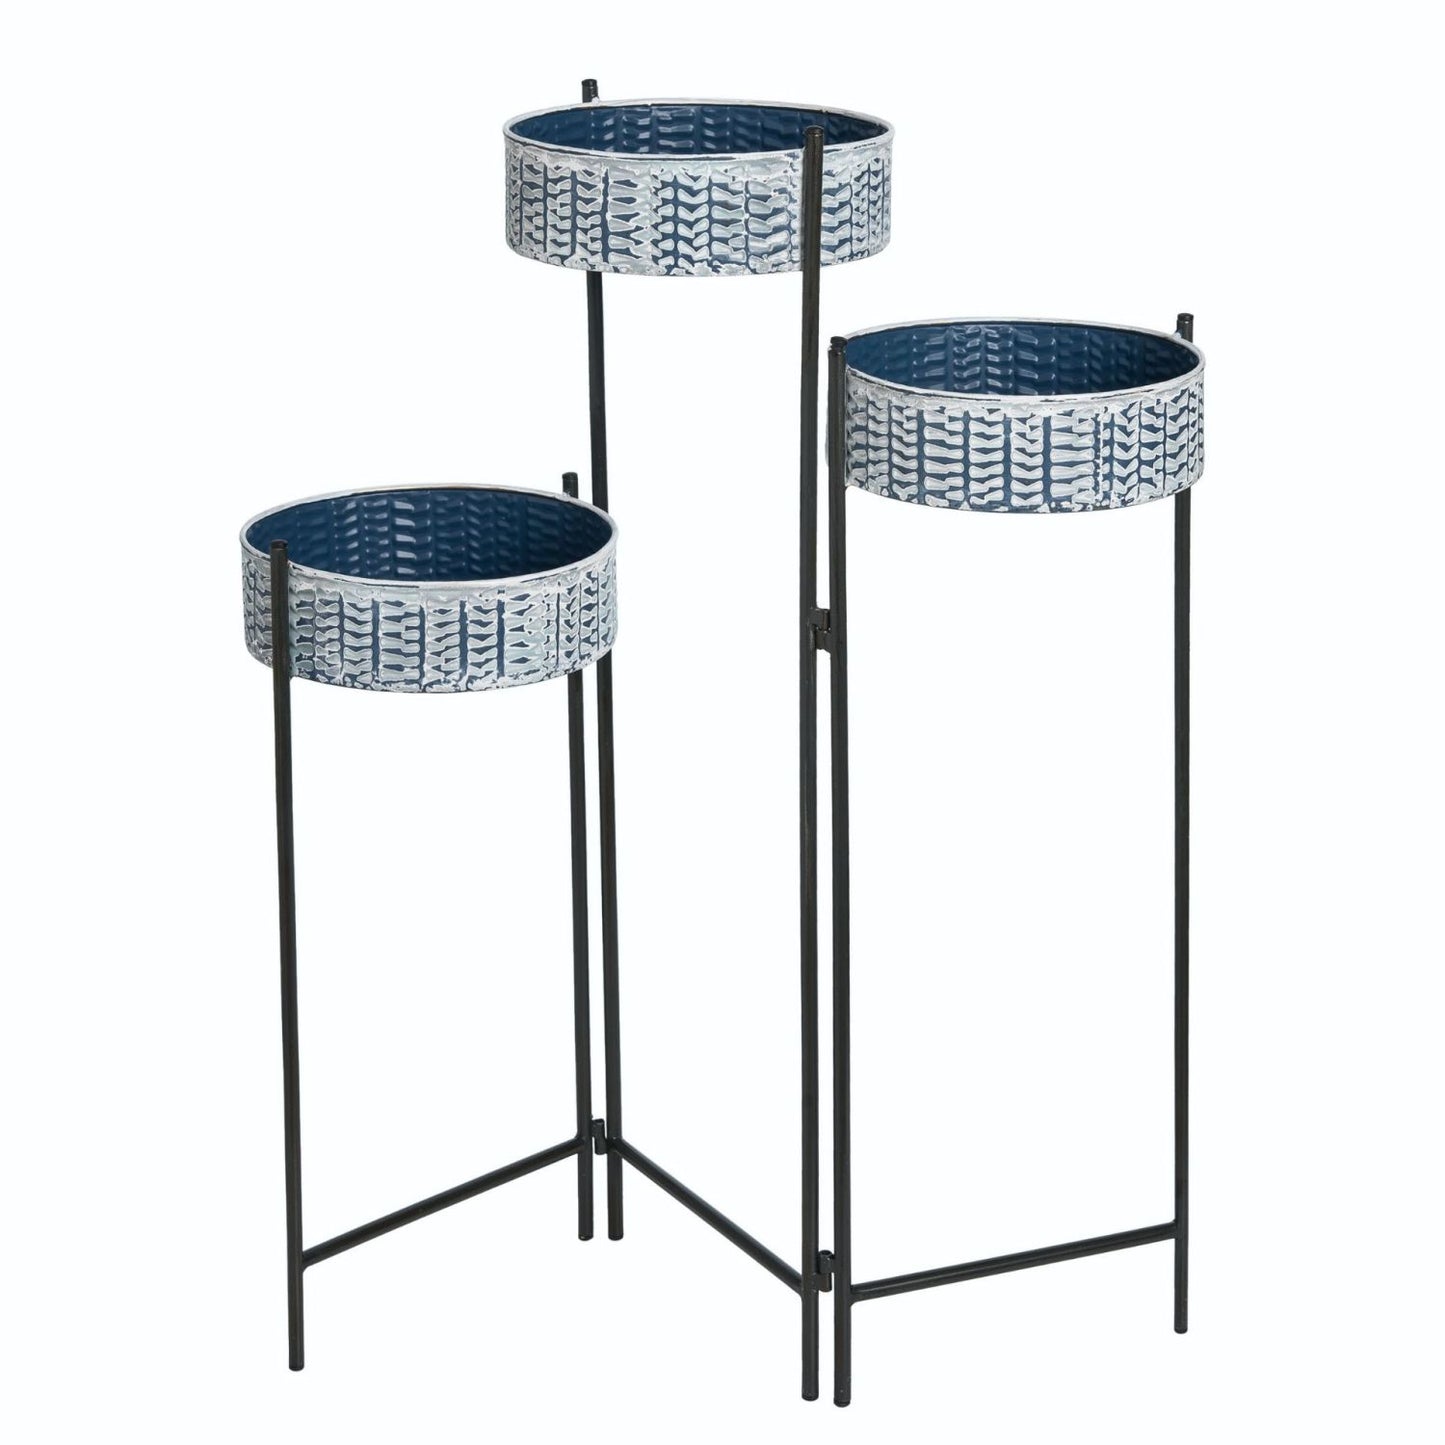 Transpac Metal Collapsible Patterned Plant Stand